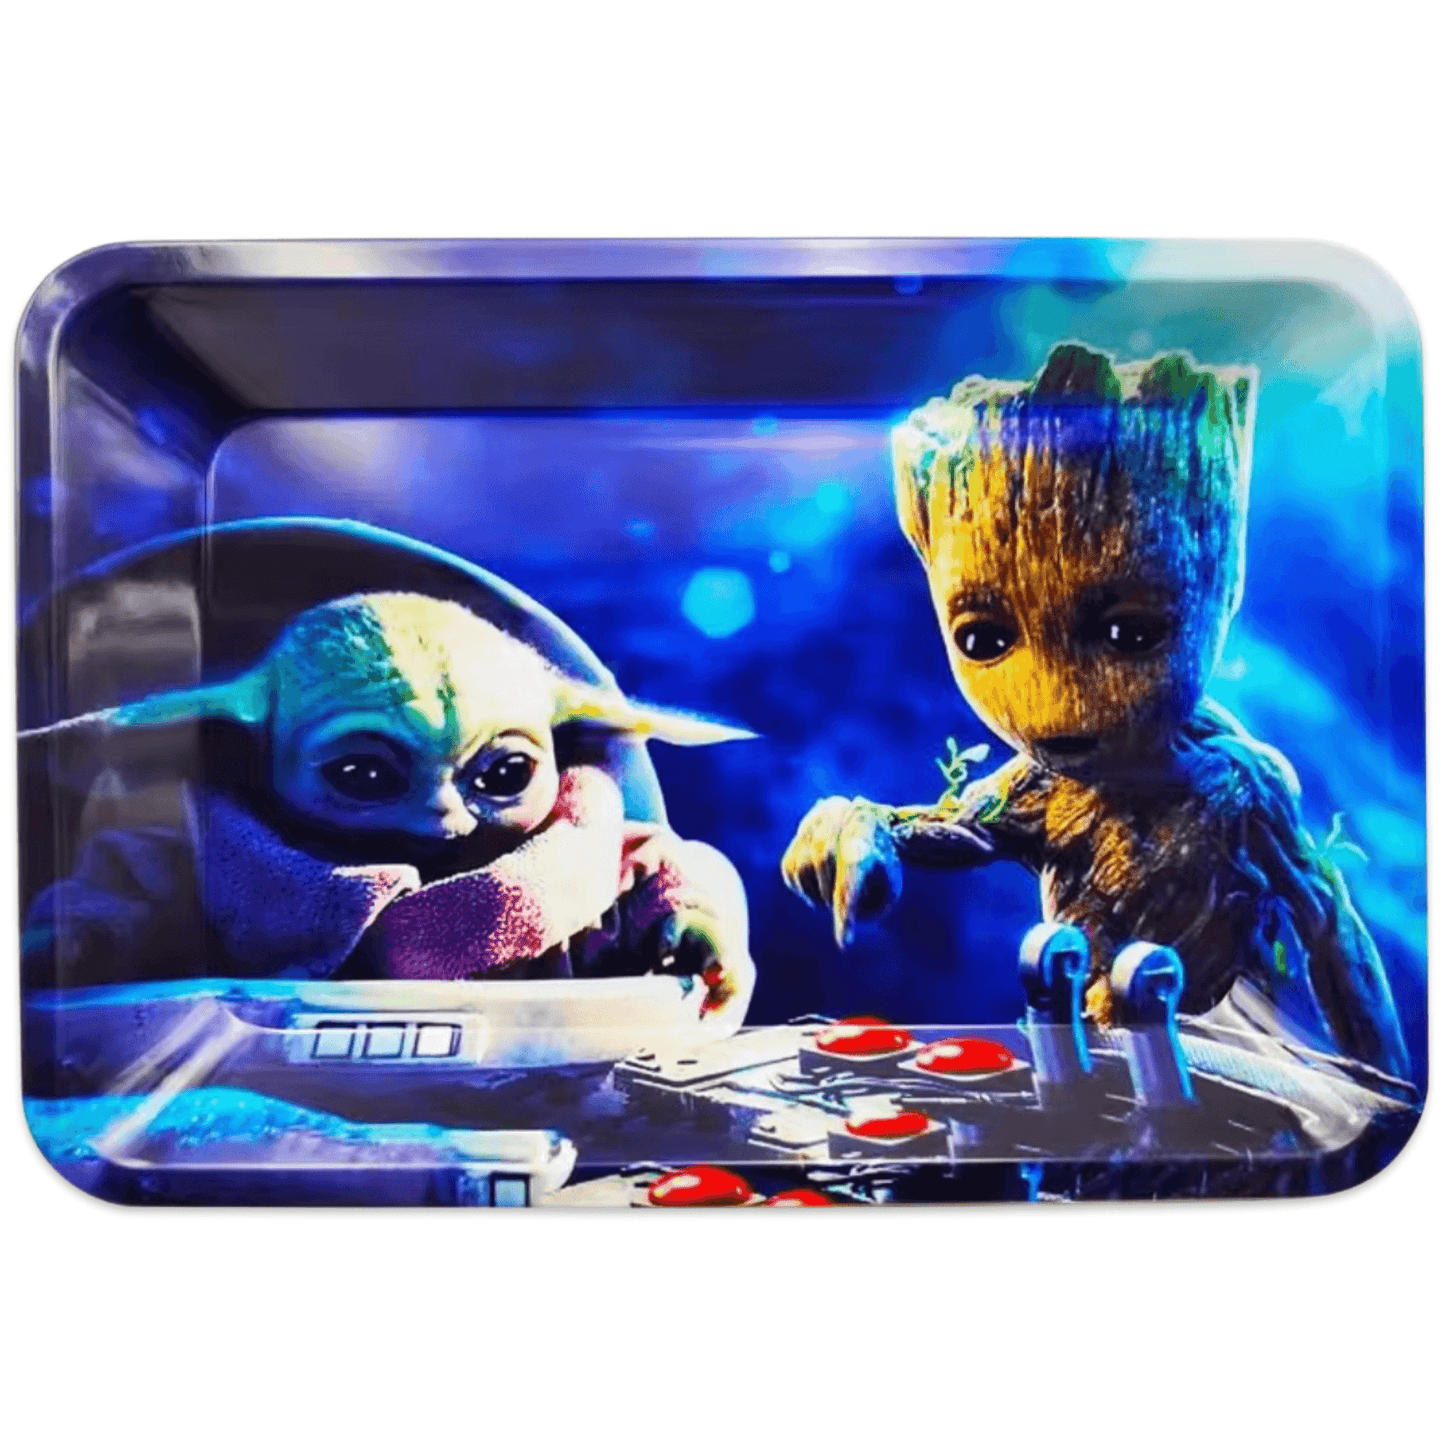 Groot + Grogu Rolling Tray - Weed Subscription Box